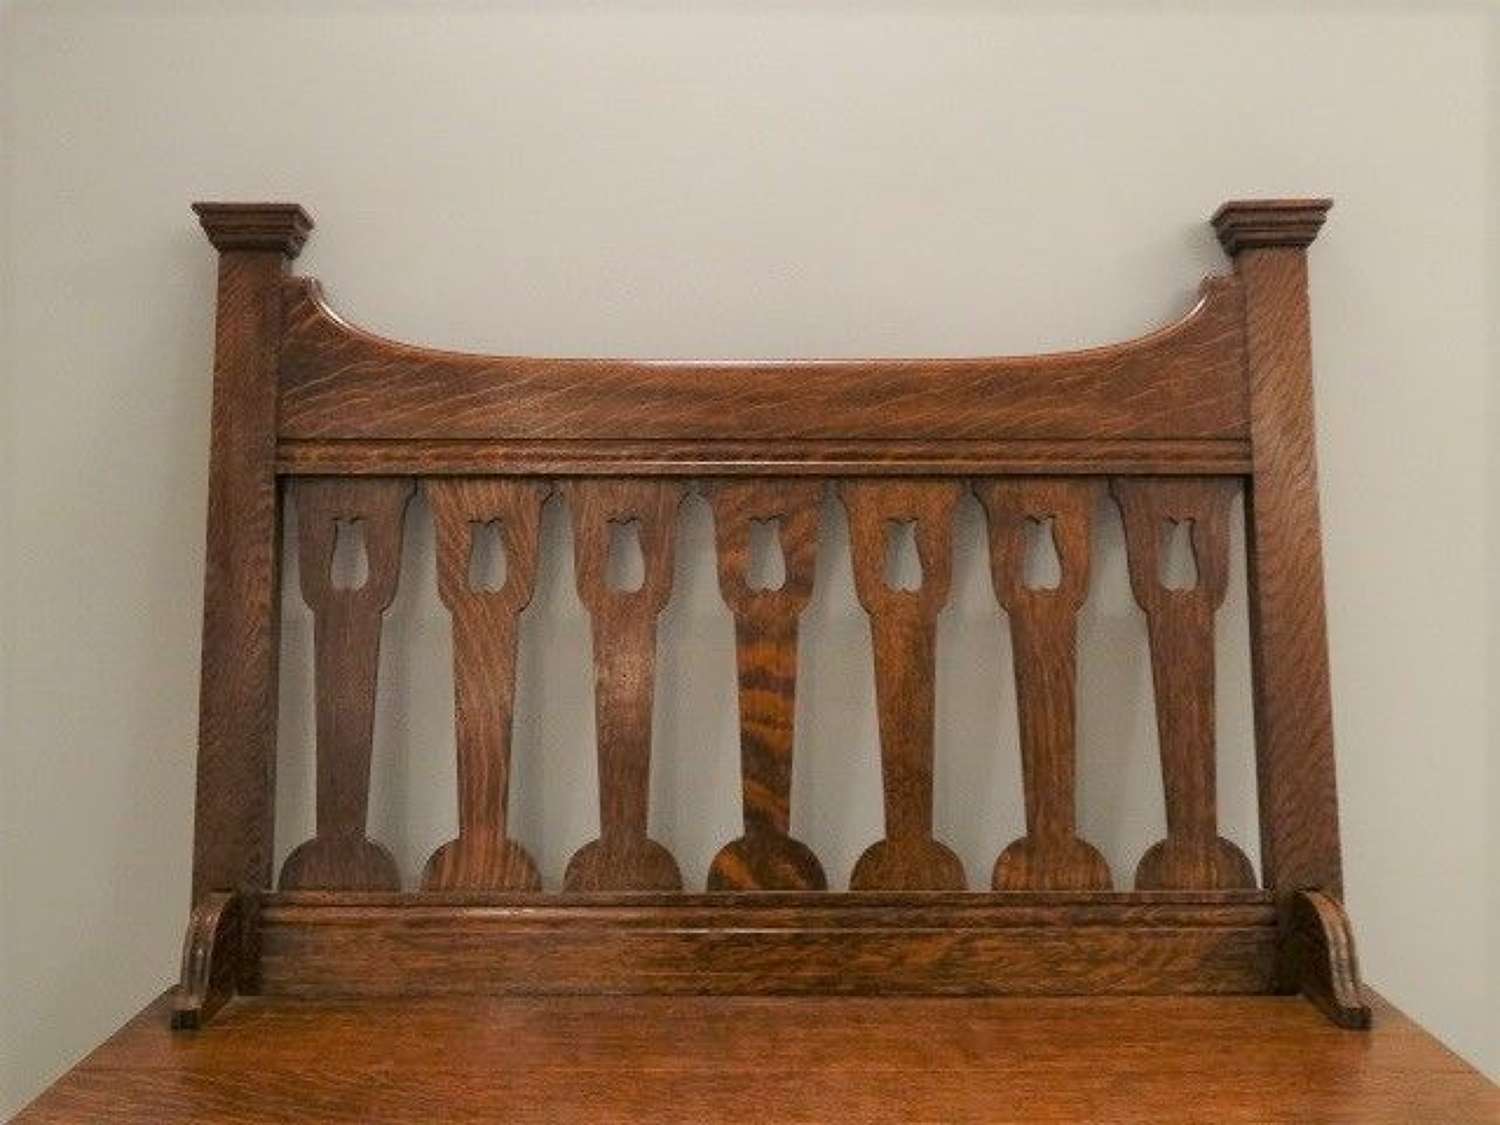 Shapland & Petter Arts & Crafts small oak hall settle bench